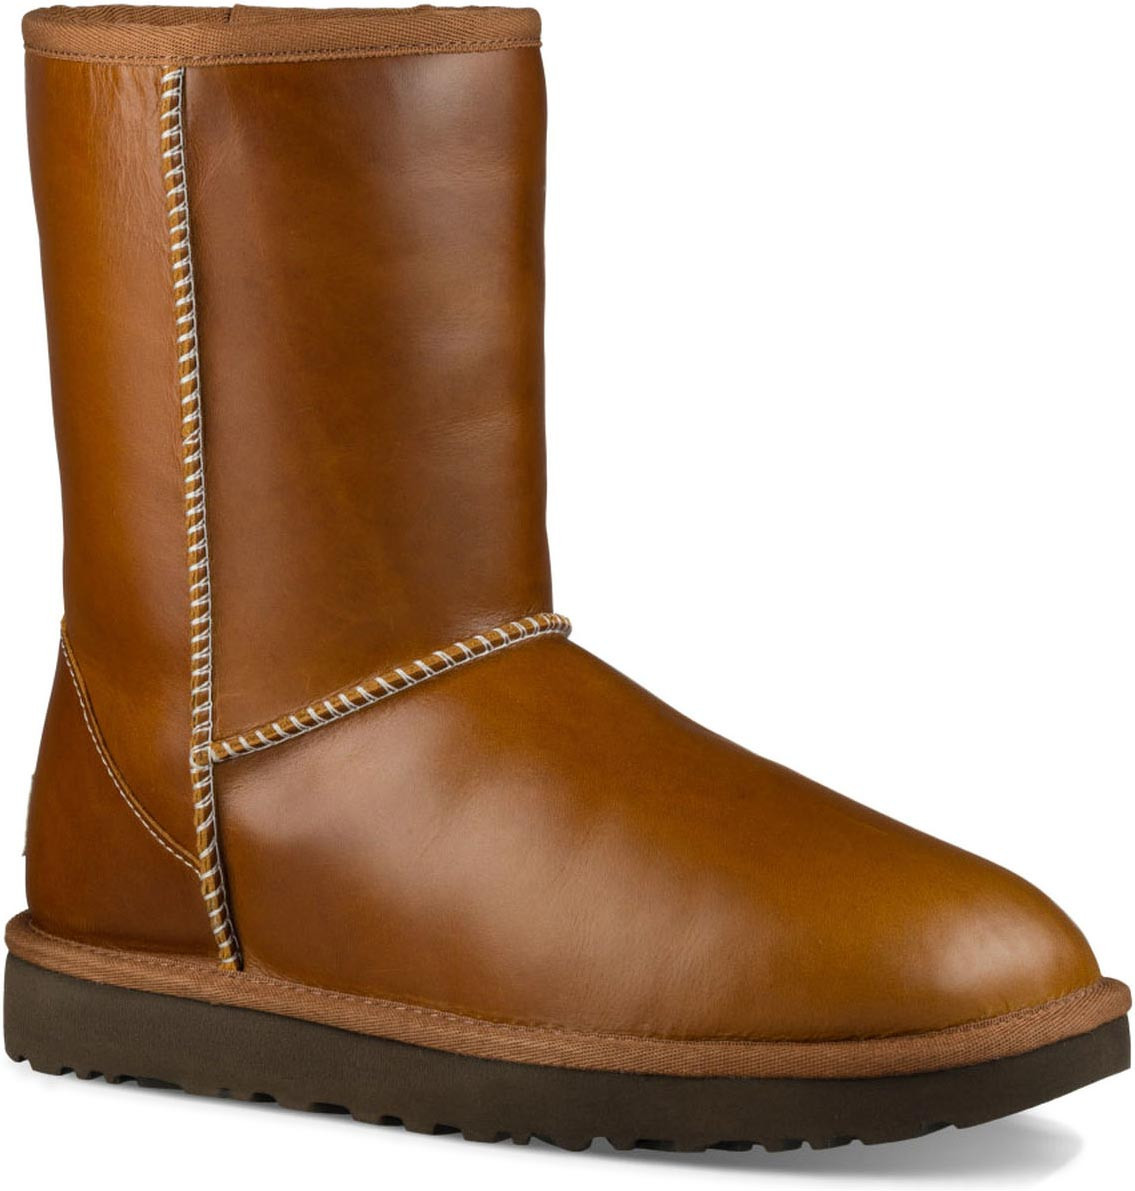 classic short leather waterproof boot ugg